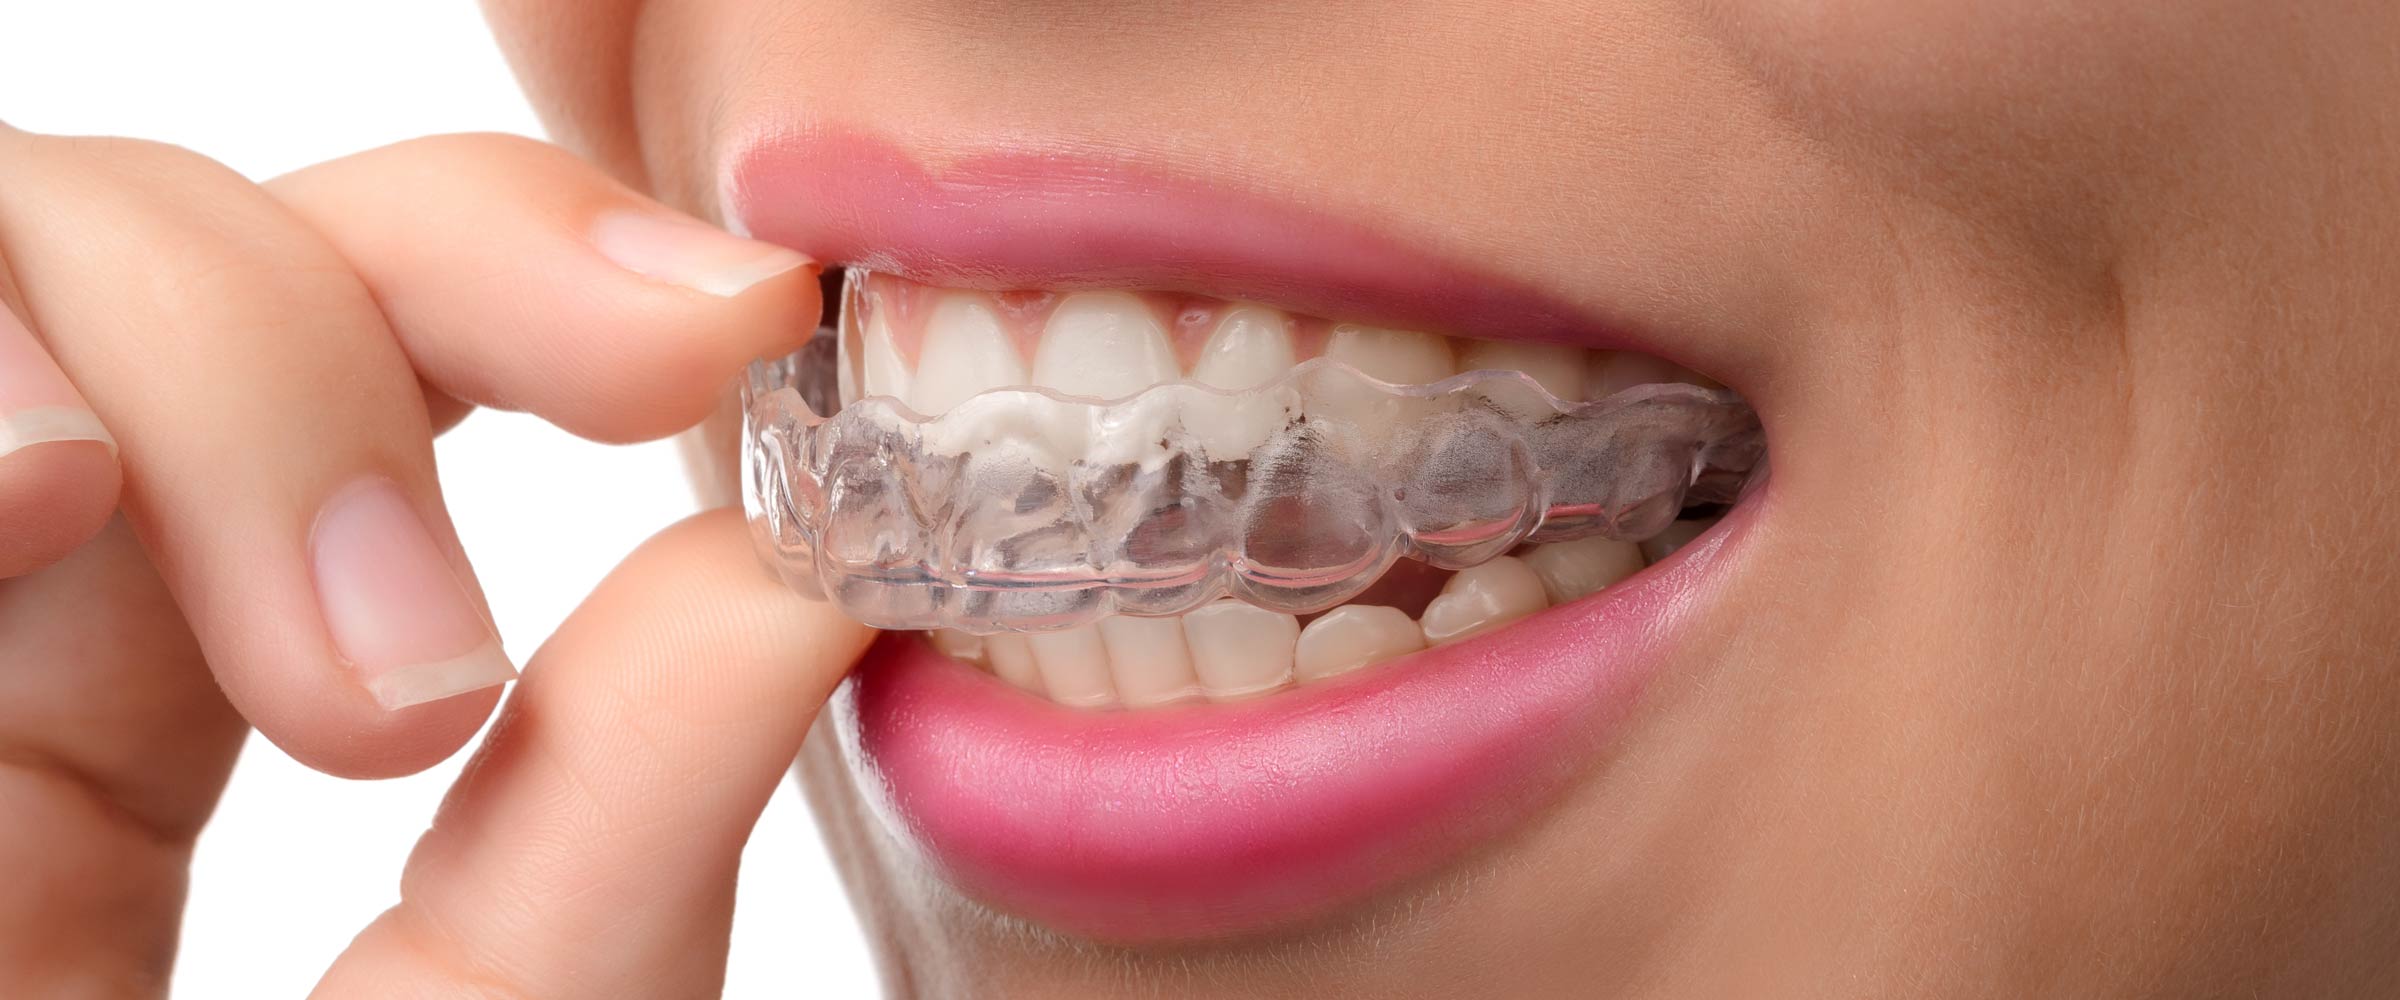 Various kinds of dental braces and their purpose - Family Dental